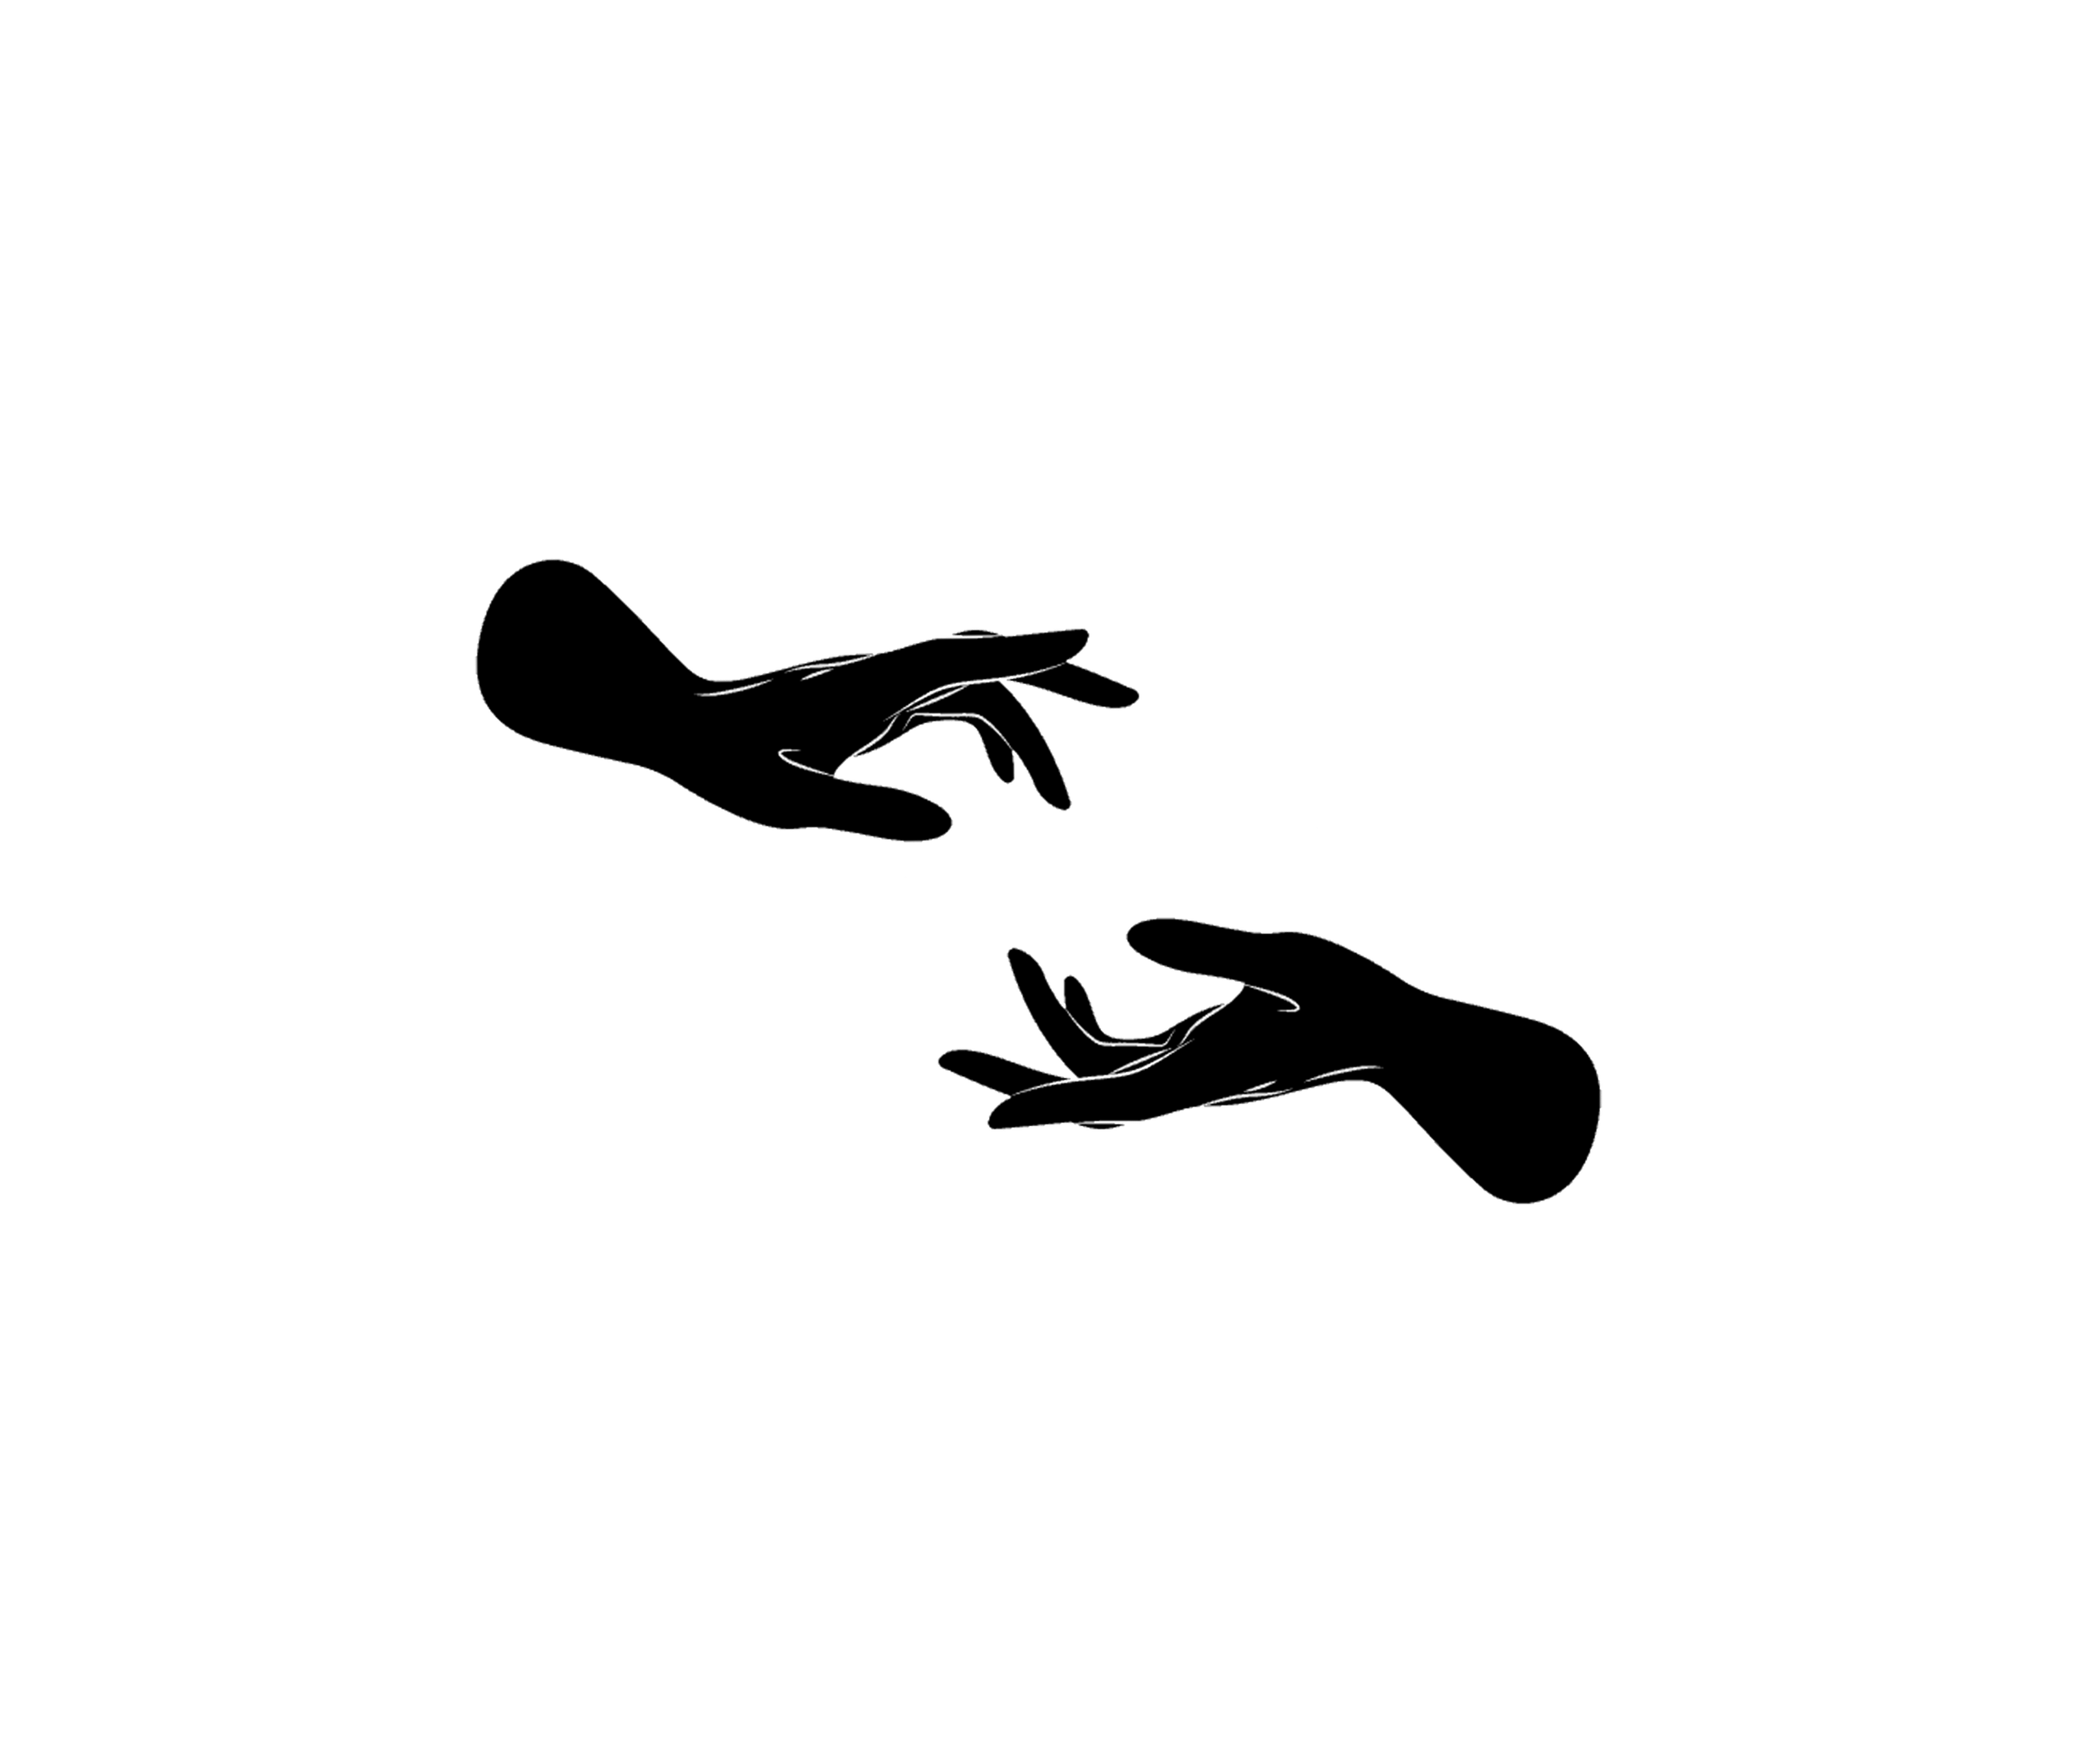 Illustration of two black color hands reaching out to each other.